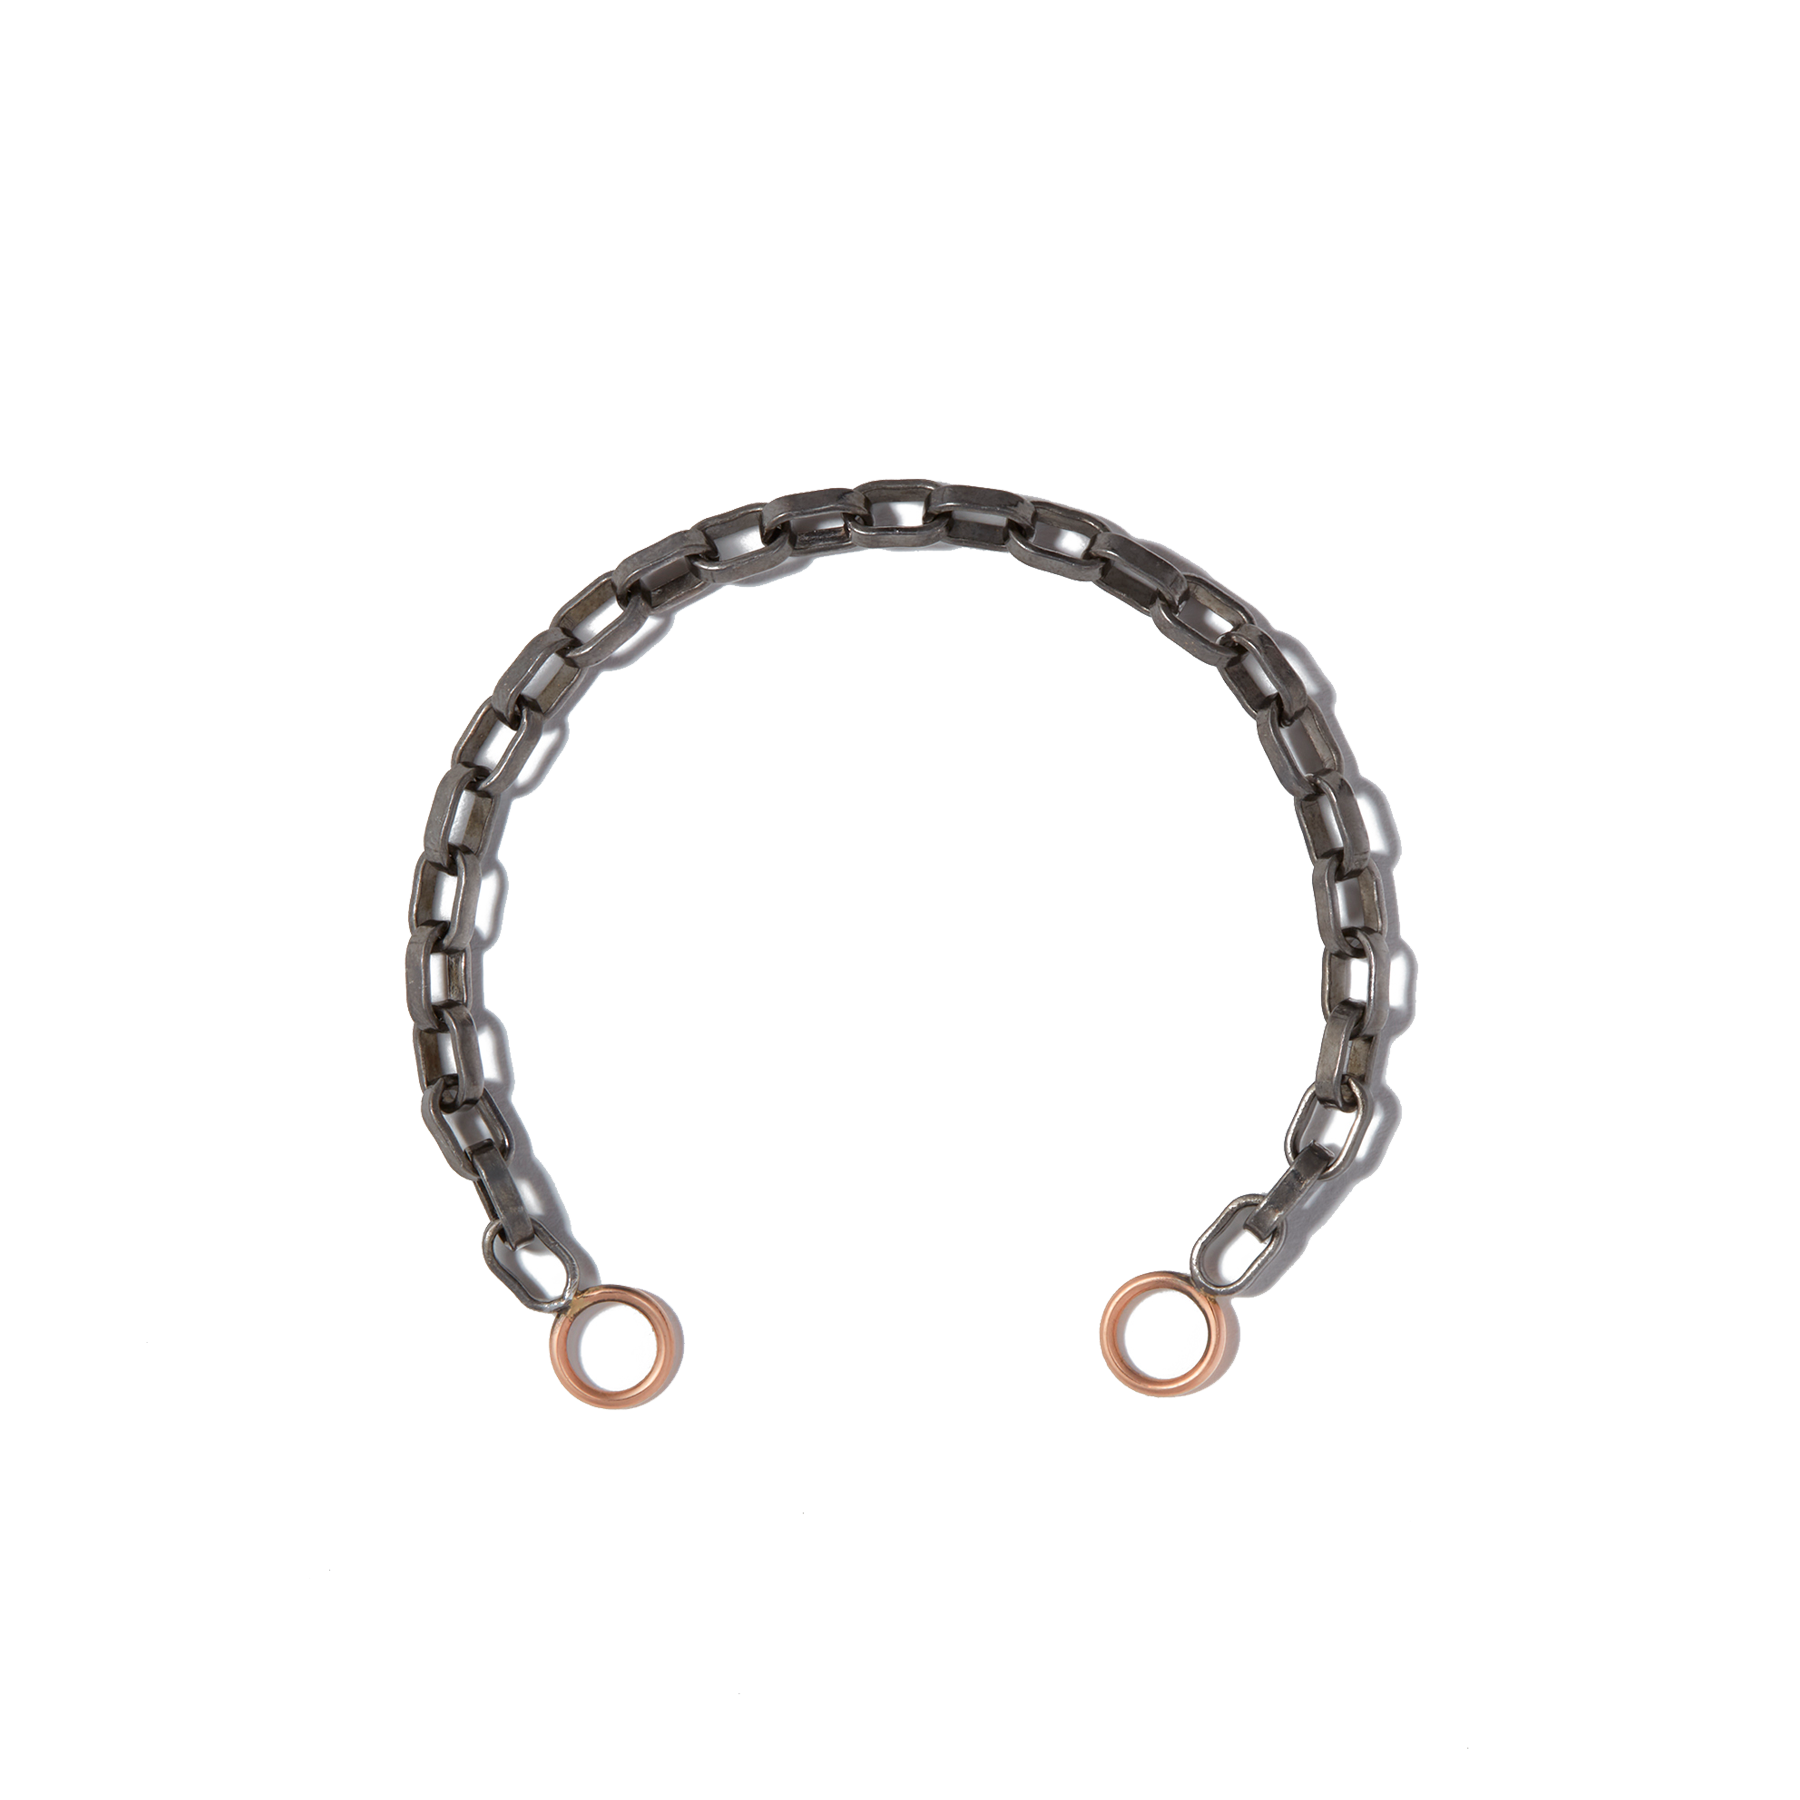 Blackened silver biker chain bracelet with rose gold loops